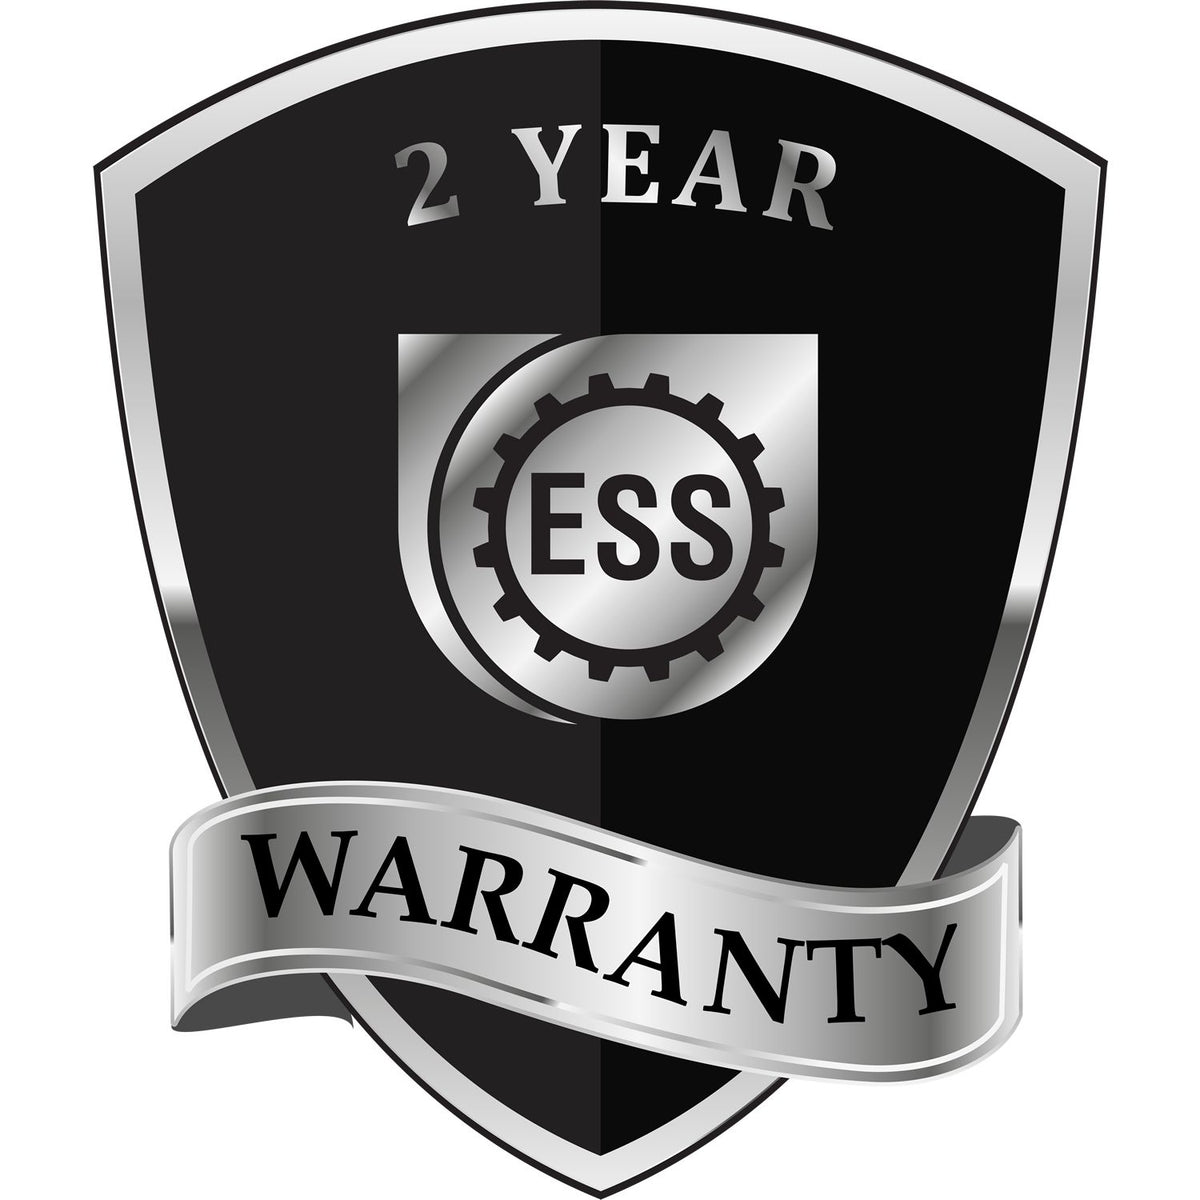 A black and silver badge or emblem showing warranty information for the Gift Georgia Geologist Seal